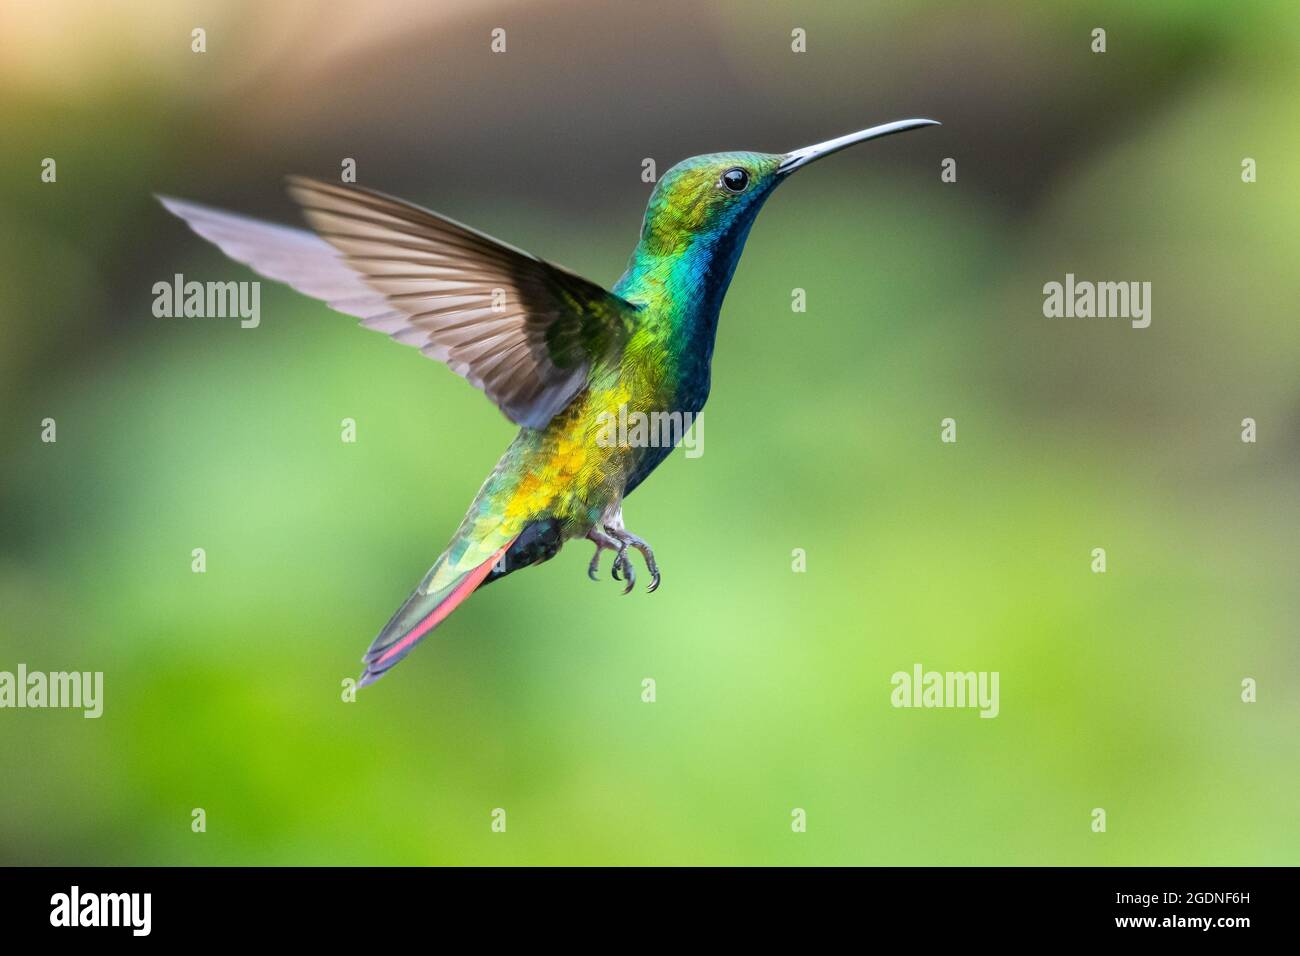 A Black-Throated Mango hummingbird (Anthracothorax nigricollis) hovering in the air with a blurred green background. Bird in flight. Stock Photo